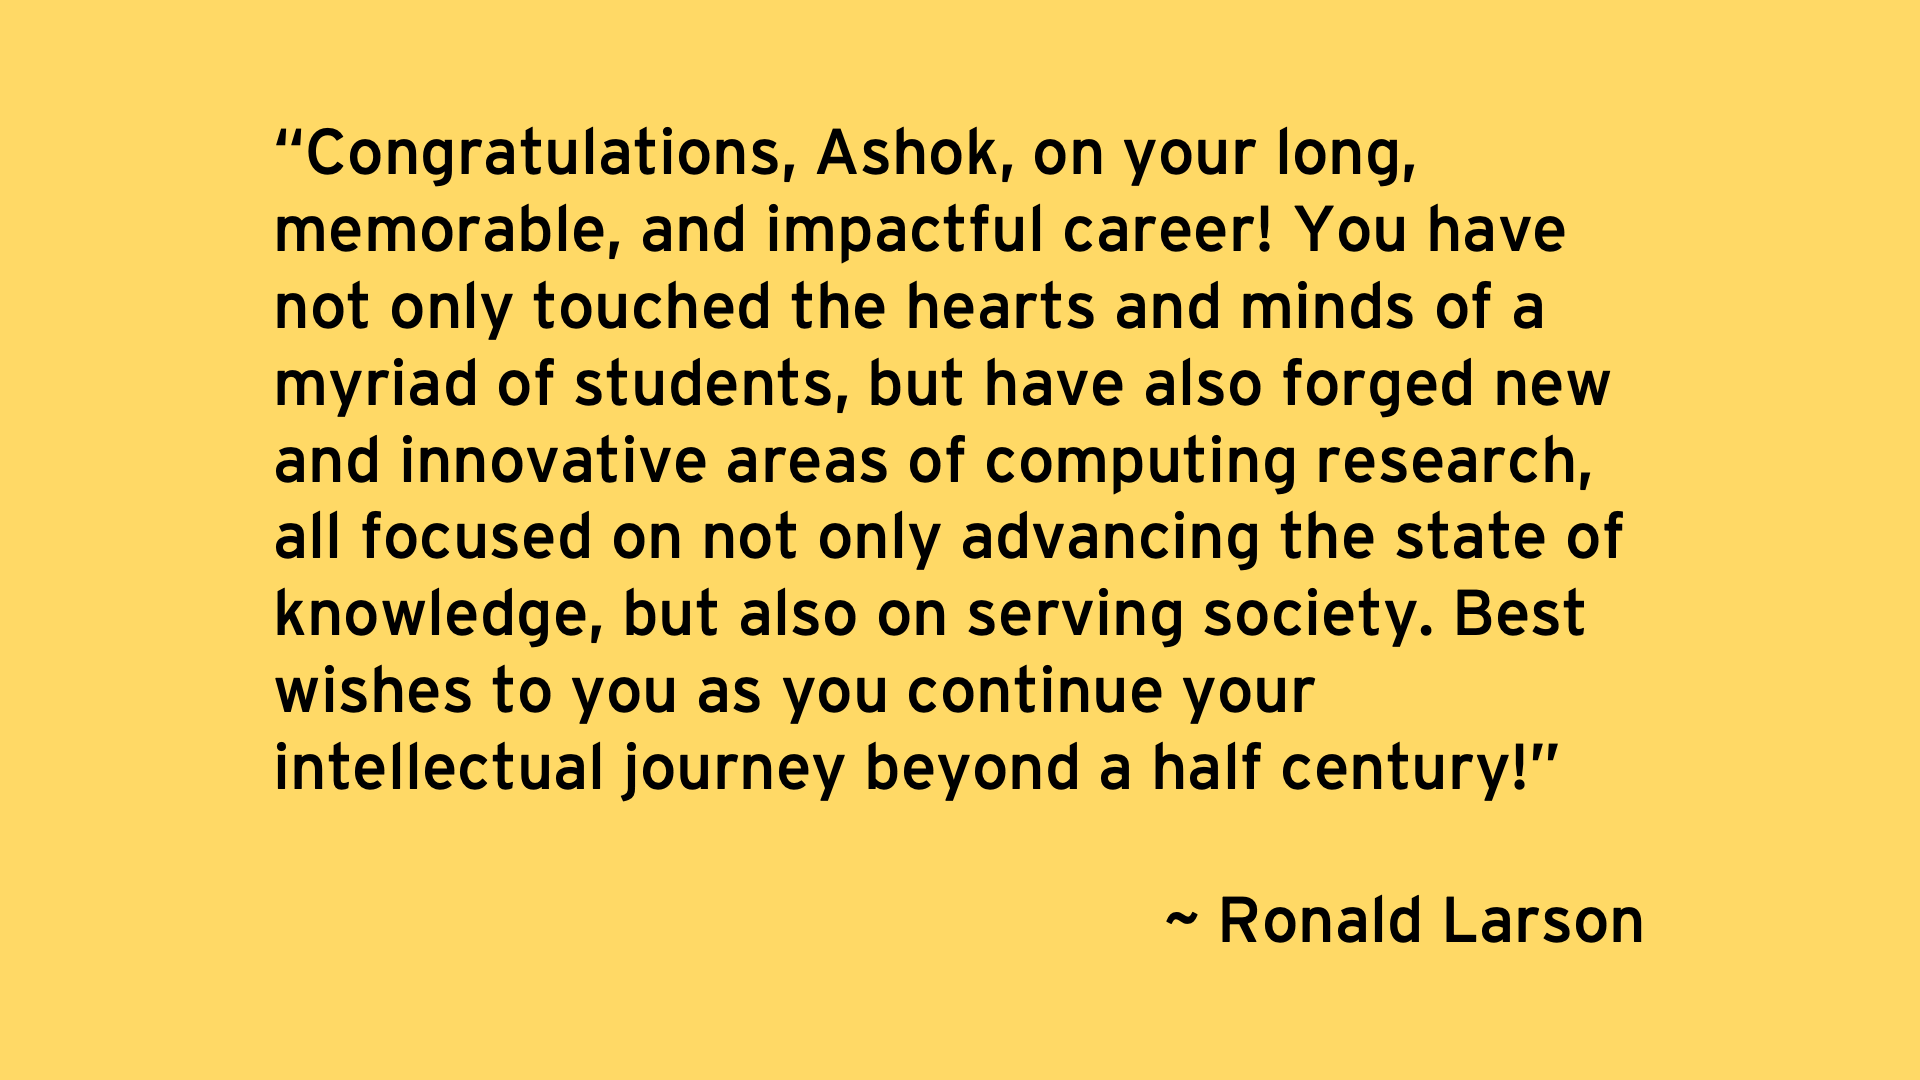 Congratulations, Ashok, on your long, memorable, and impactful career! You have not only touched the hearts and minds of a myriad of students, but have also forged new and innovative areas of computing research, all focused on not only advancing the state of knowledge, but also on serving society. Best wishes to you as you continue your intellectual journey beyond a half century! - Ronald Larson